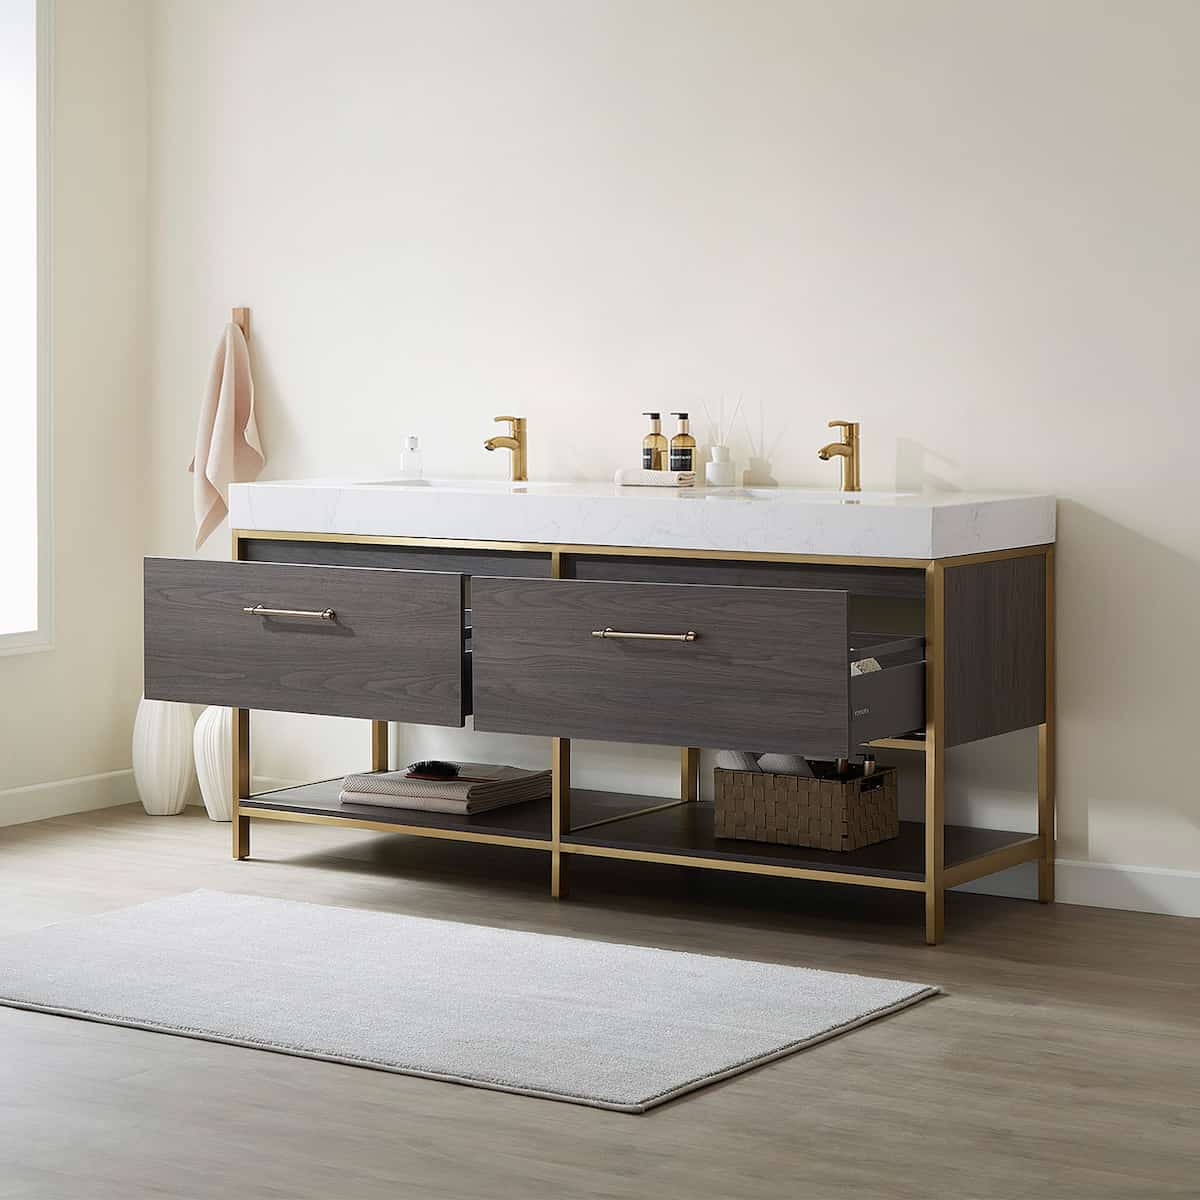 Vinnova Palma 72 Inch Freestanding Double Sink Bath Vanity in Suleiman Oak with White Composite Grain Stone Without Mirror Drawers 701272G-SO-GW-NM